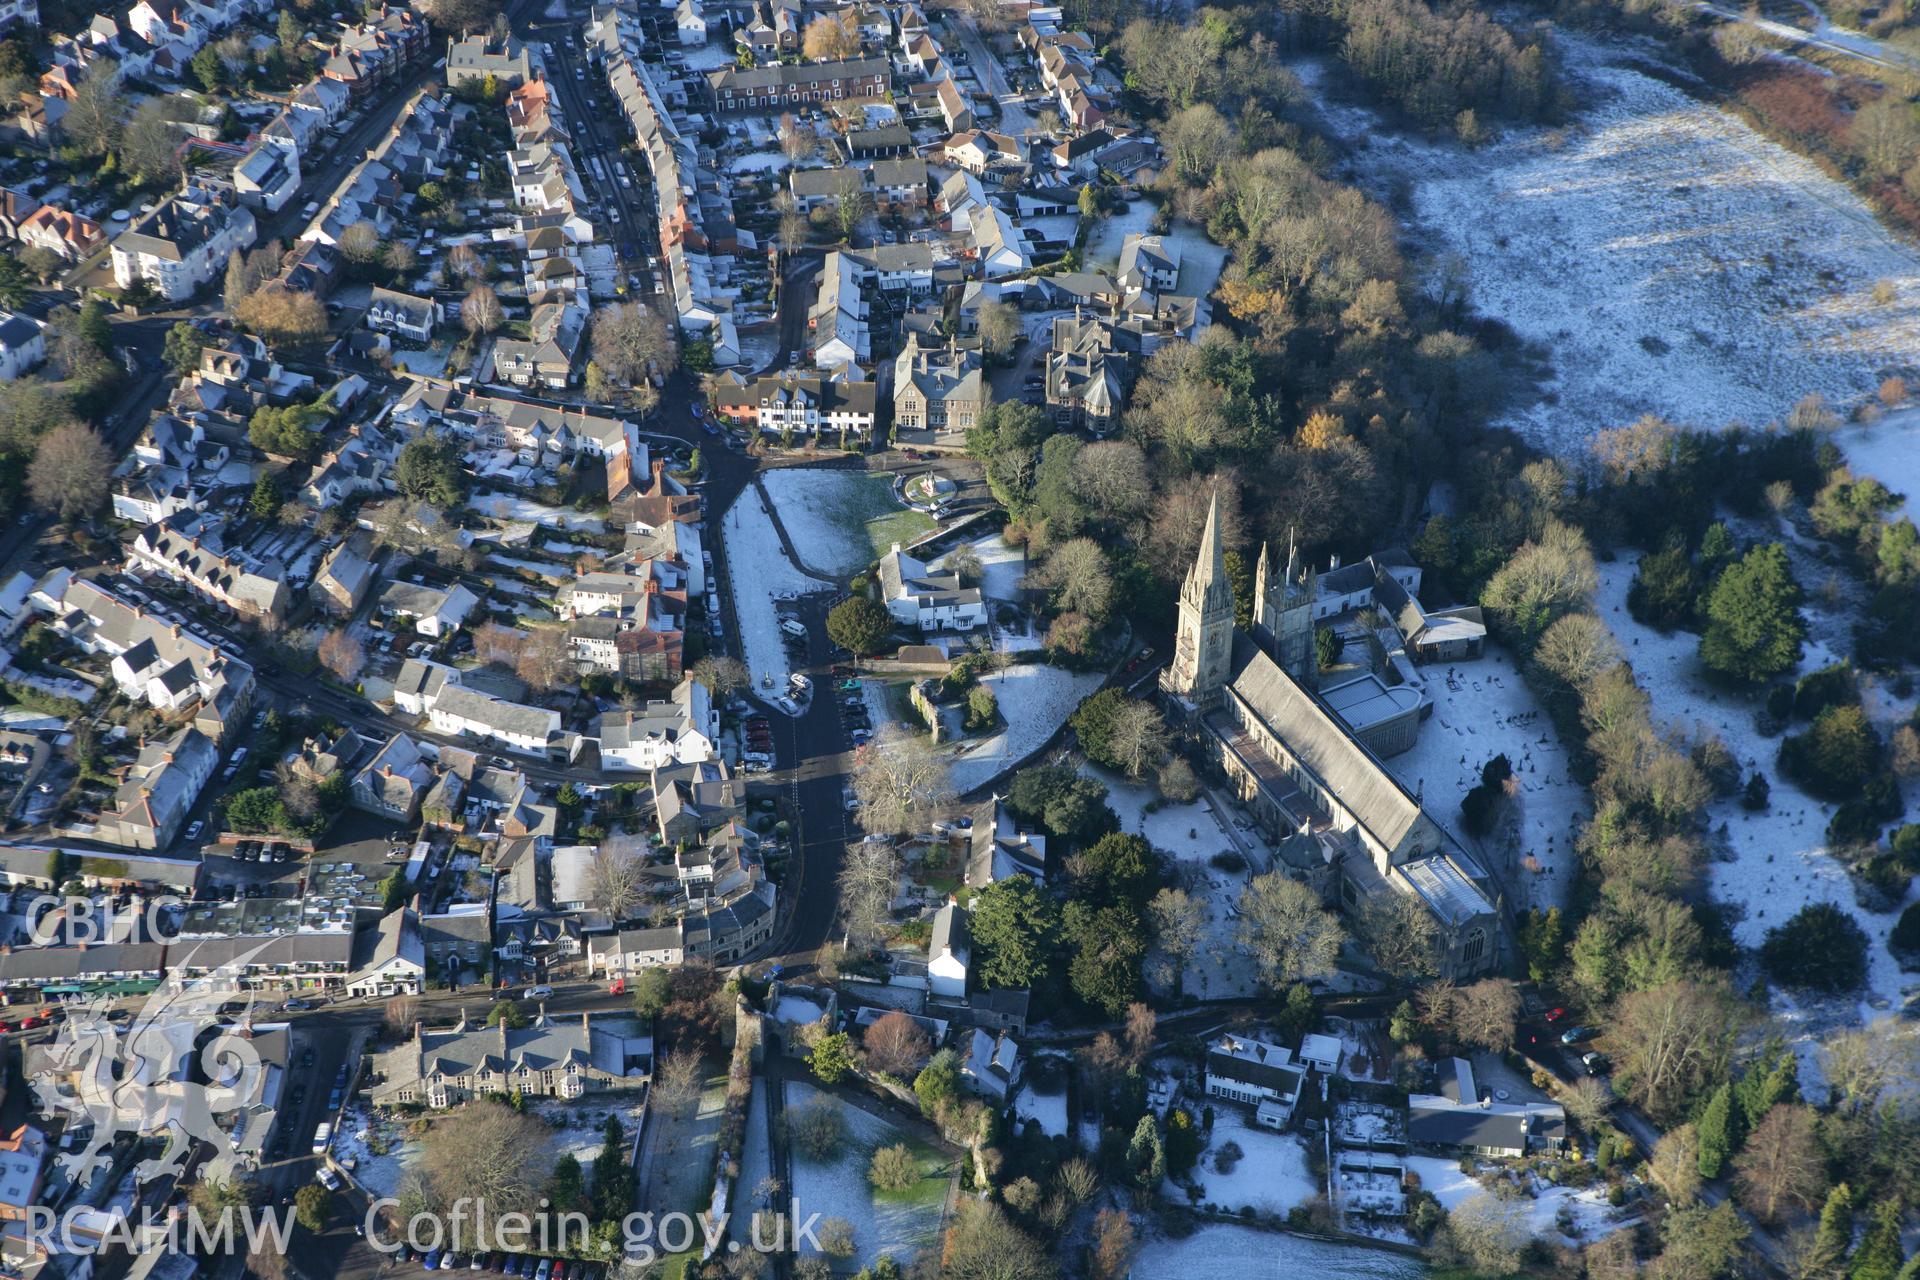 RCAHMW colour oblique photograph of Llandaff Cathedral. Taken by Toby Driver on 08/12/2010.